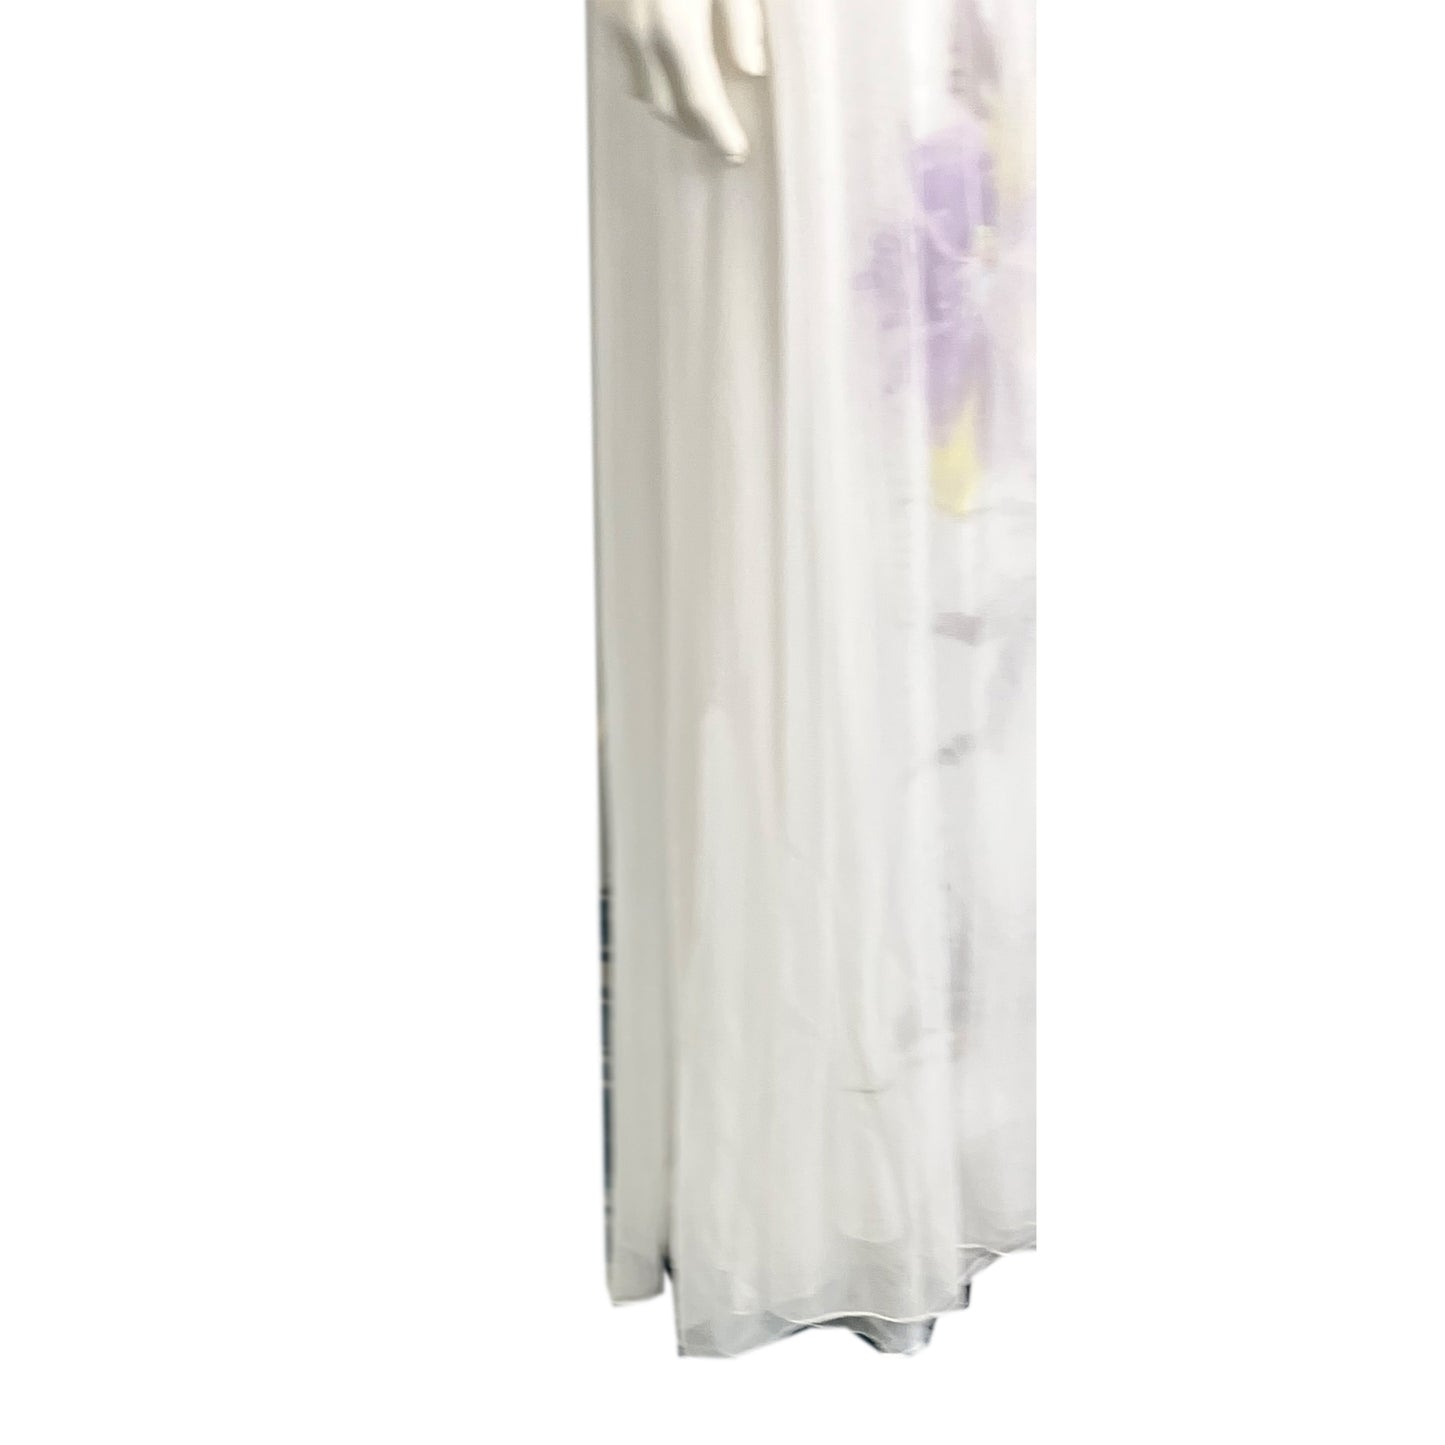 Gown One-Shoulder Mesh Floral White Size 6 SKU 000351-4